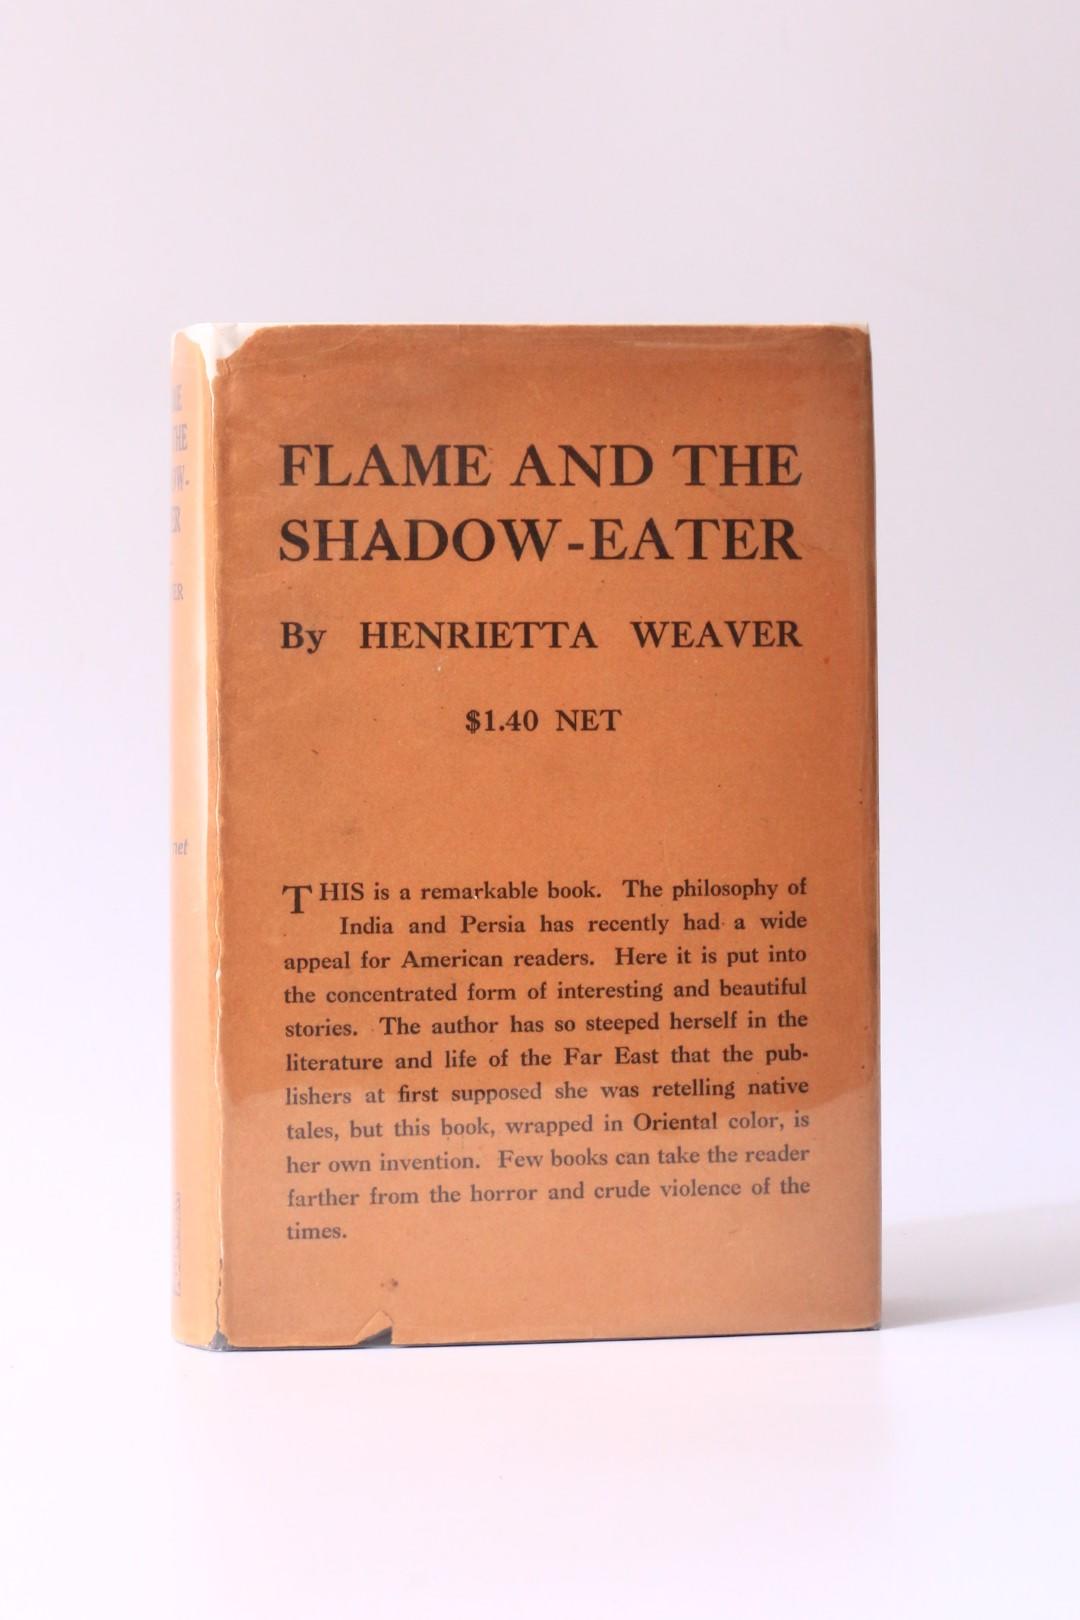 Henrietta Weaver - Flame and the Shadow-Eater - Henry Holt, 1917, First Edition.